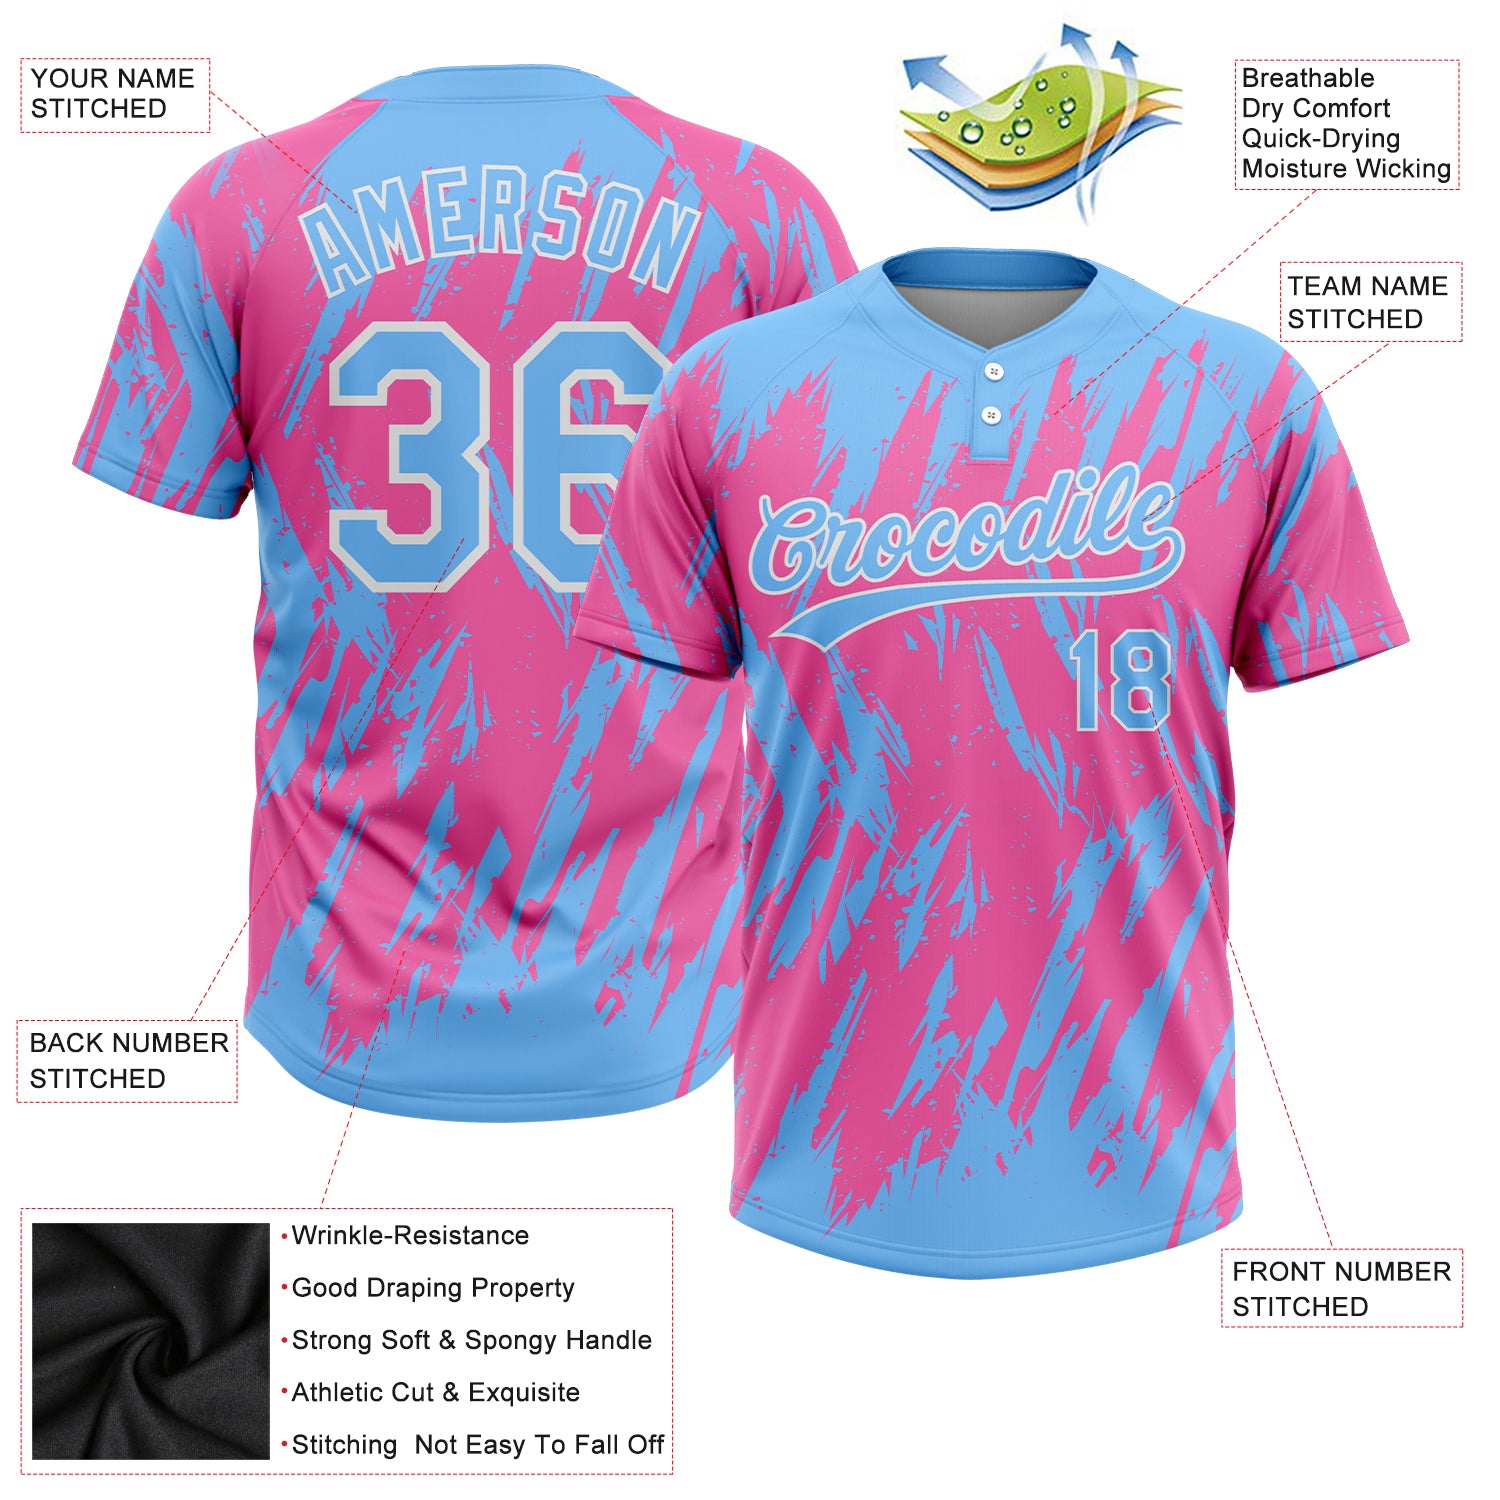 Custom Pink White Pinstripe Royal Authentic Baseball Jersey Discount